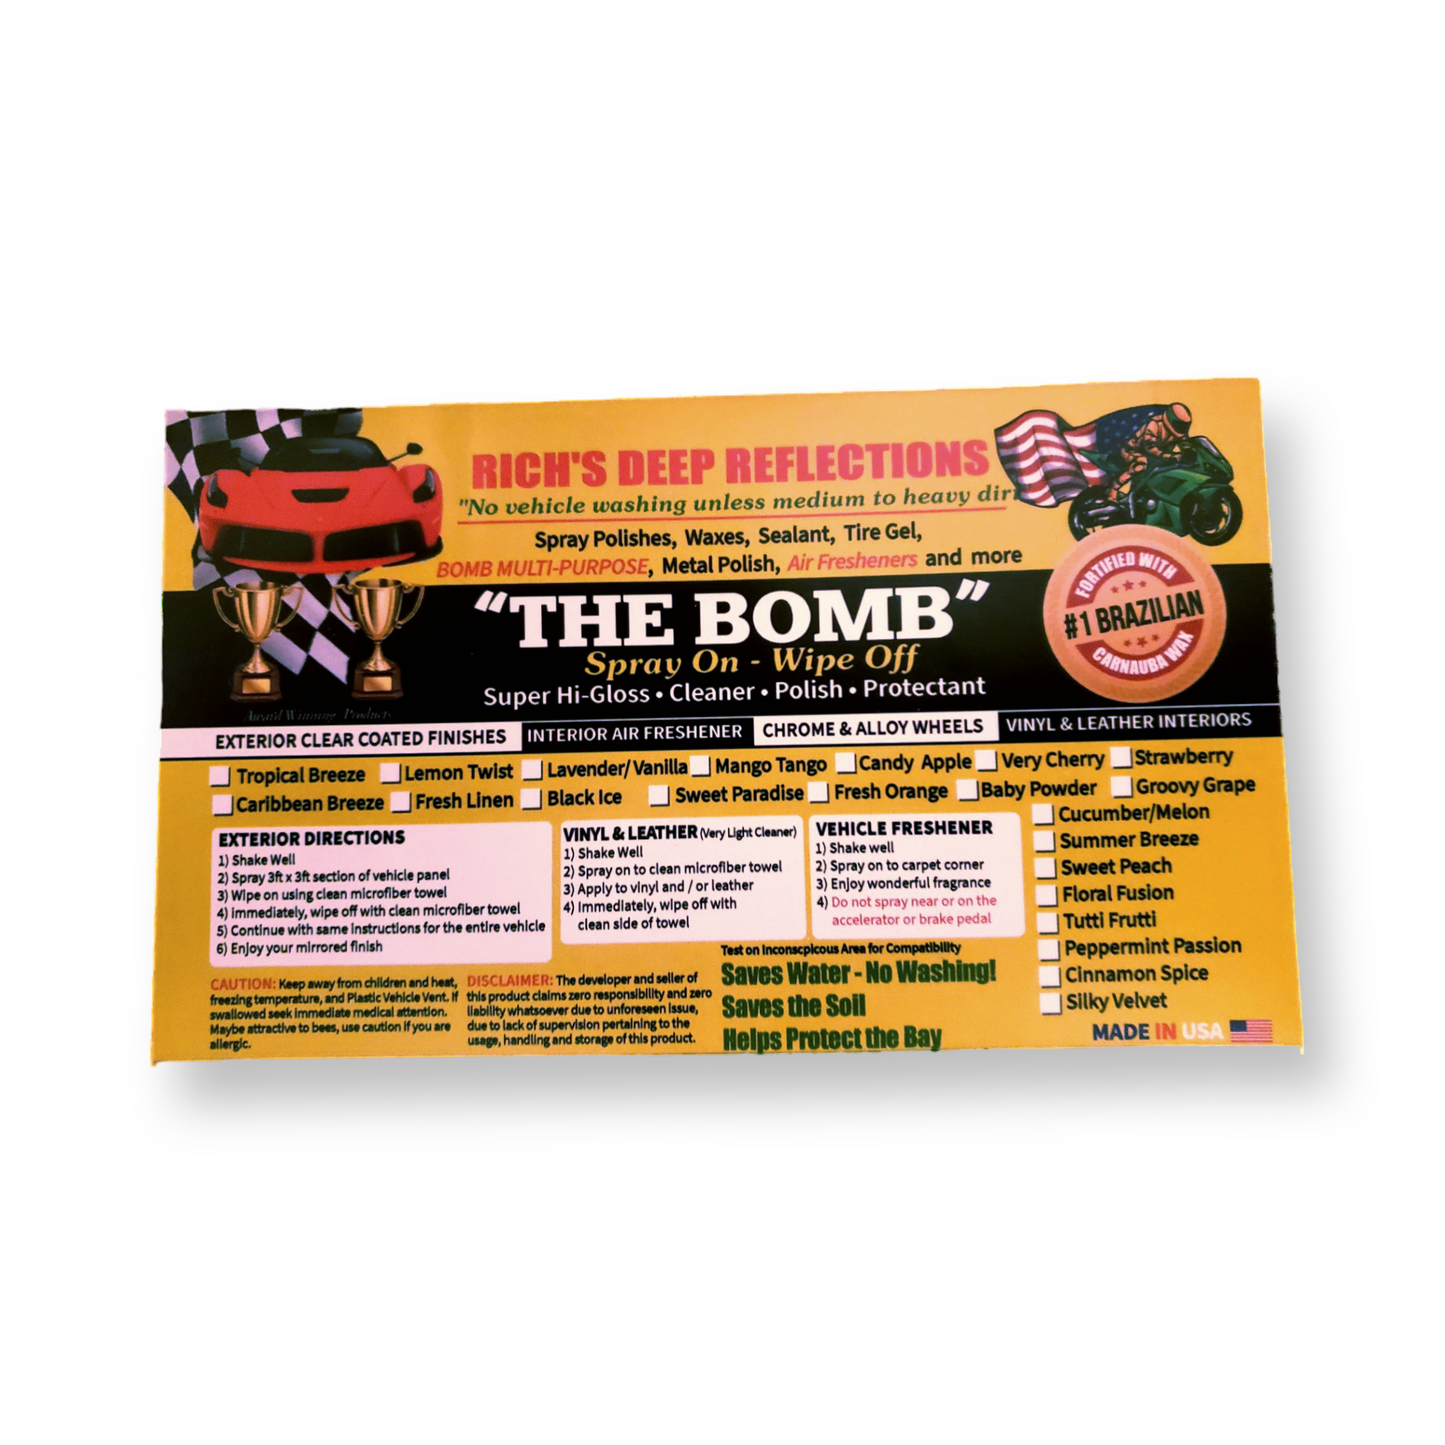 The Bomb: Spray On - Wipe Off (Super Hi-Gloss - Cleaner - Polish - Protectant)